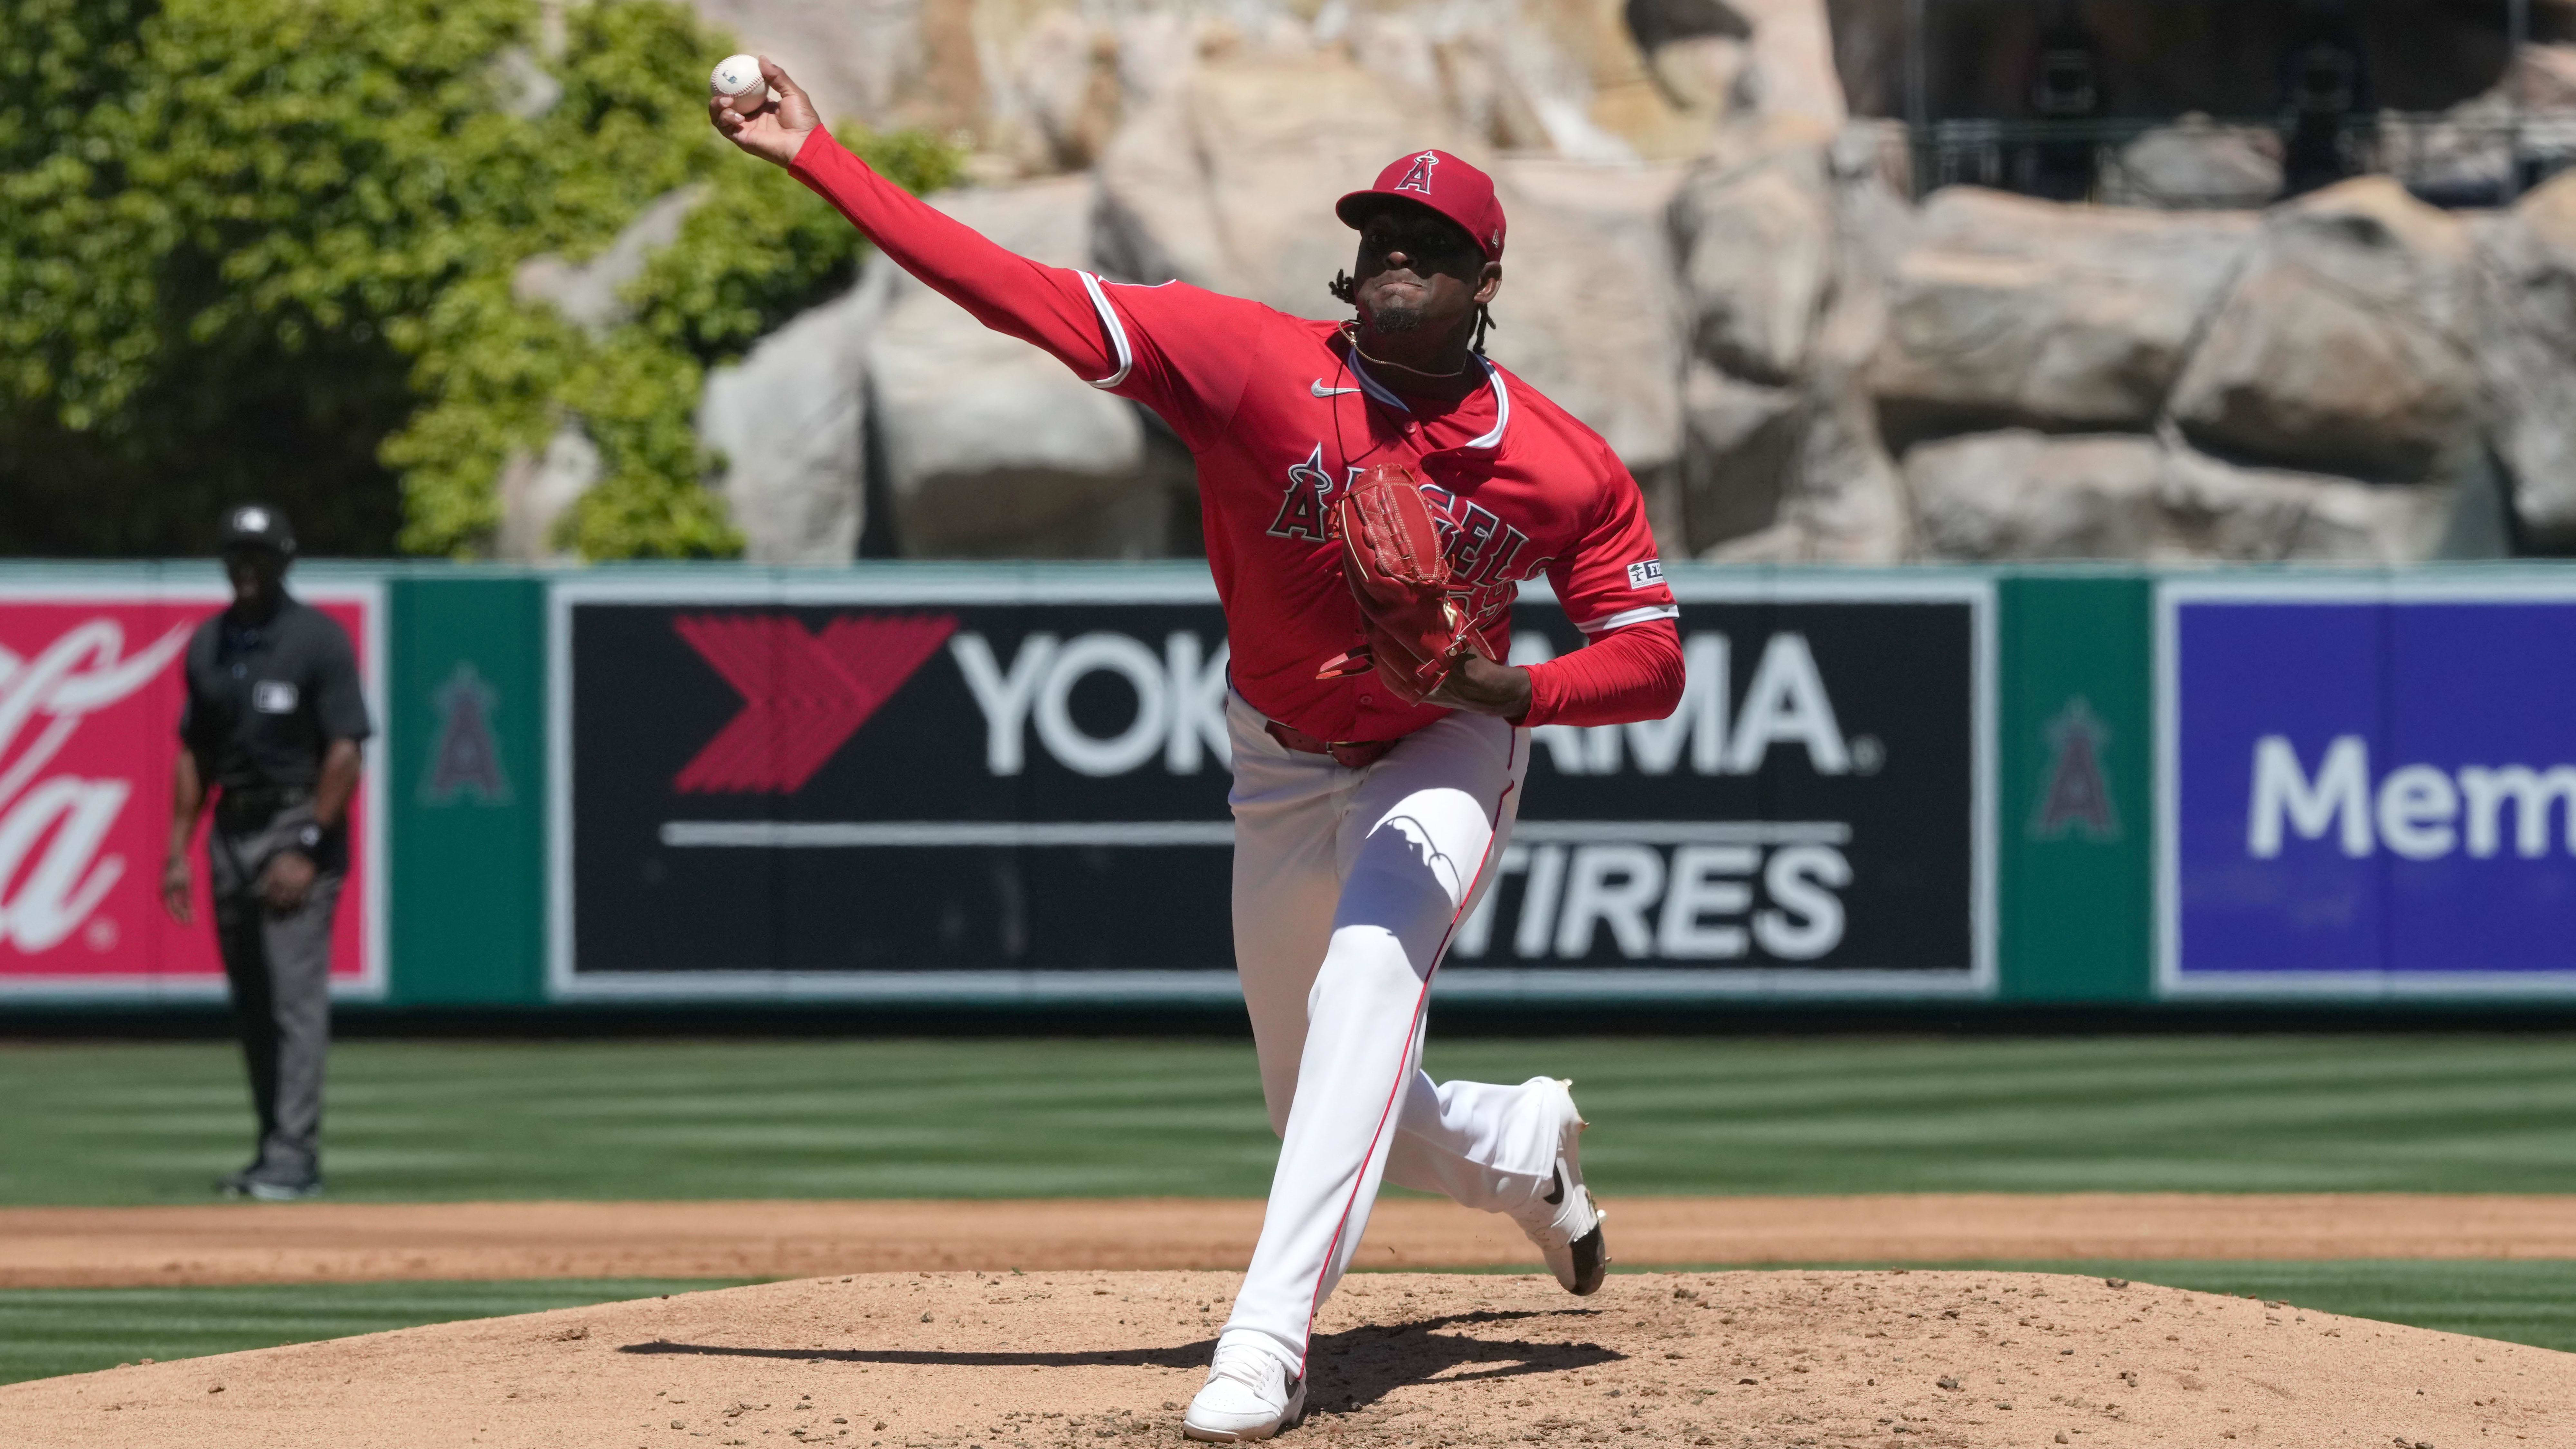 Angels Outfielder Uses Hilarious Adjective to Describe Starting Pitcher